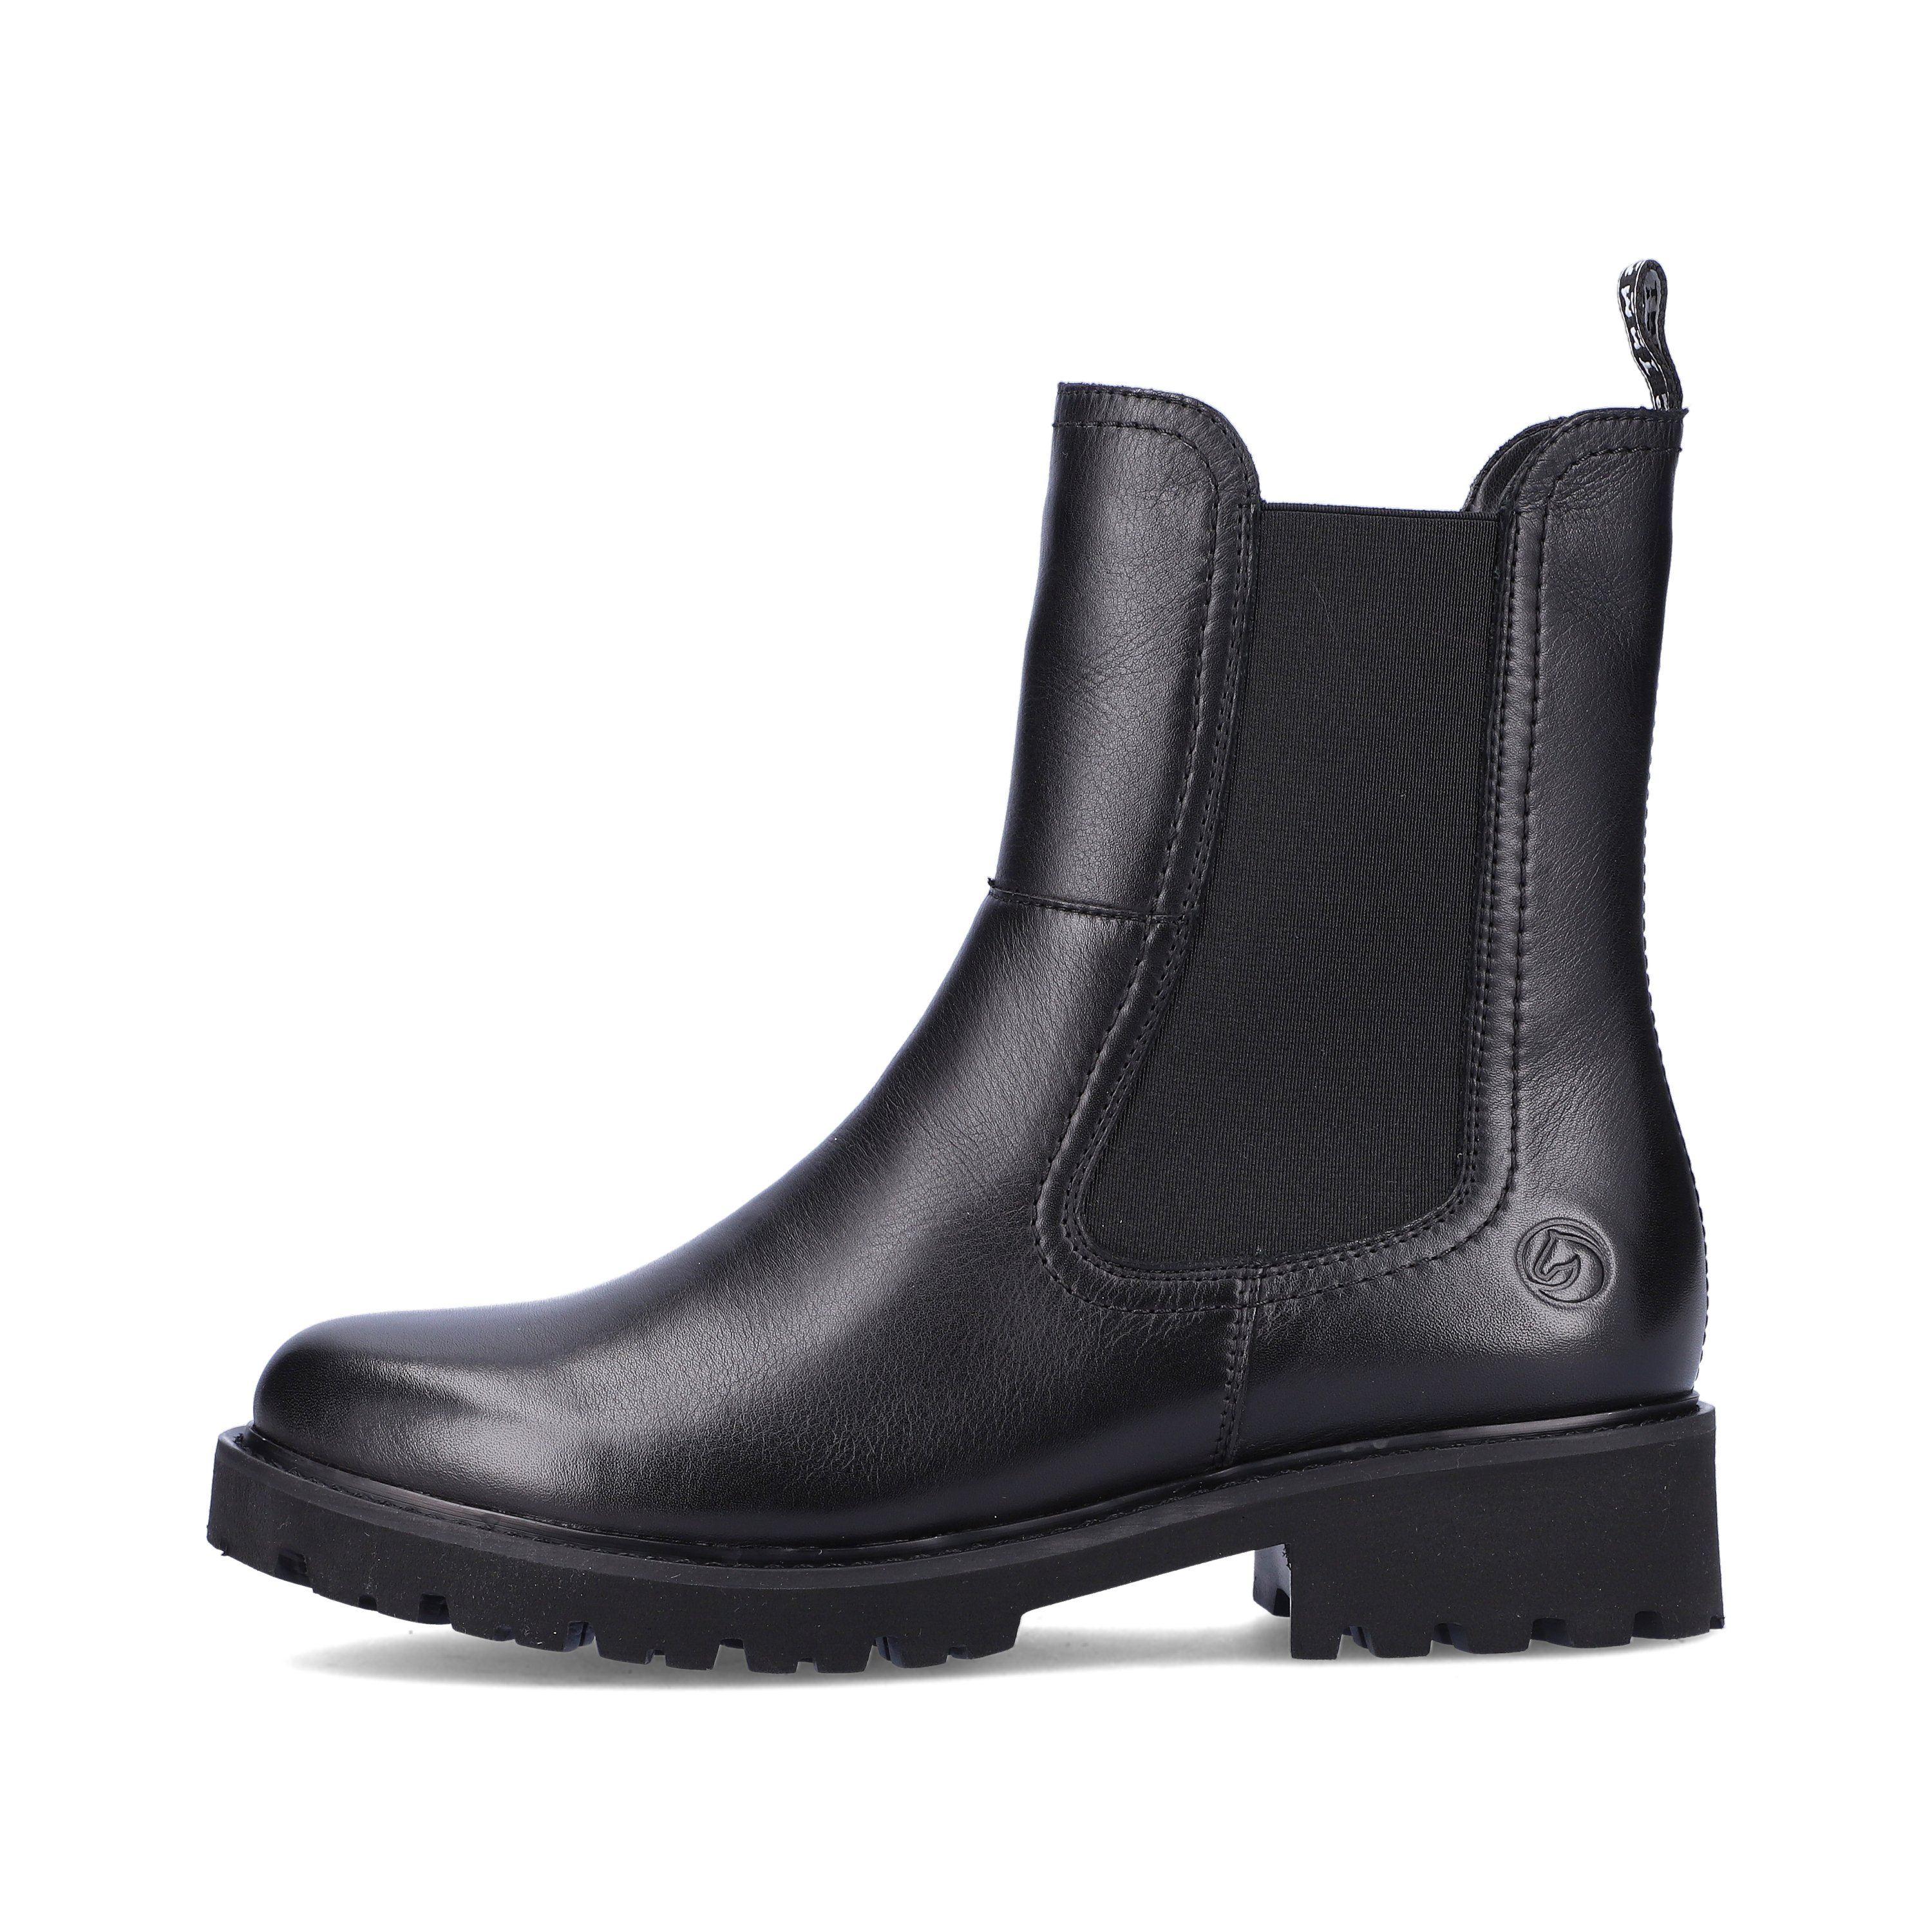 Graphite black remonte women´s Chelsea boots D8694-00 with cushioning sole. The outside of the shoe